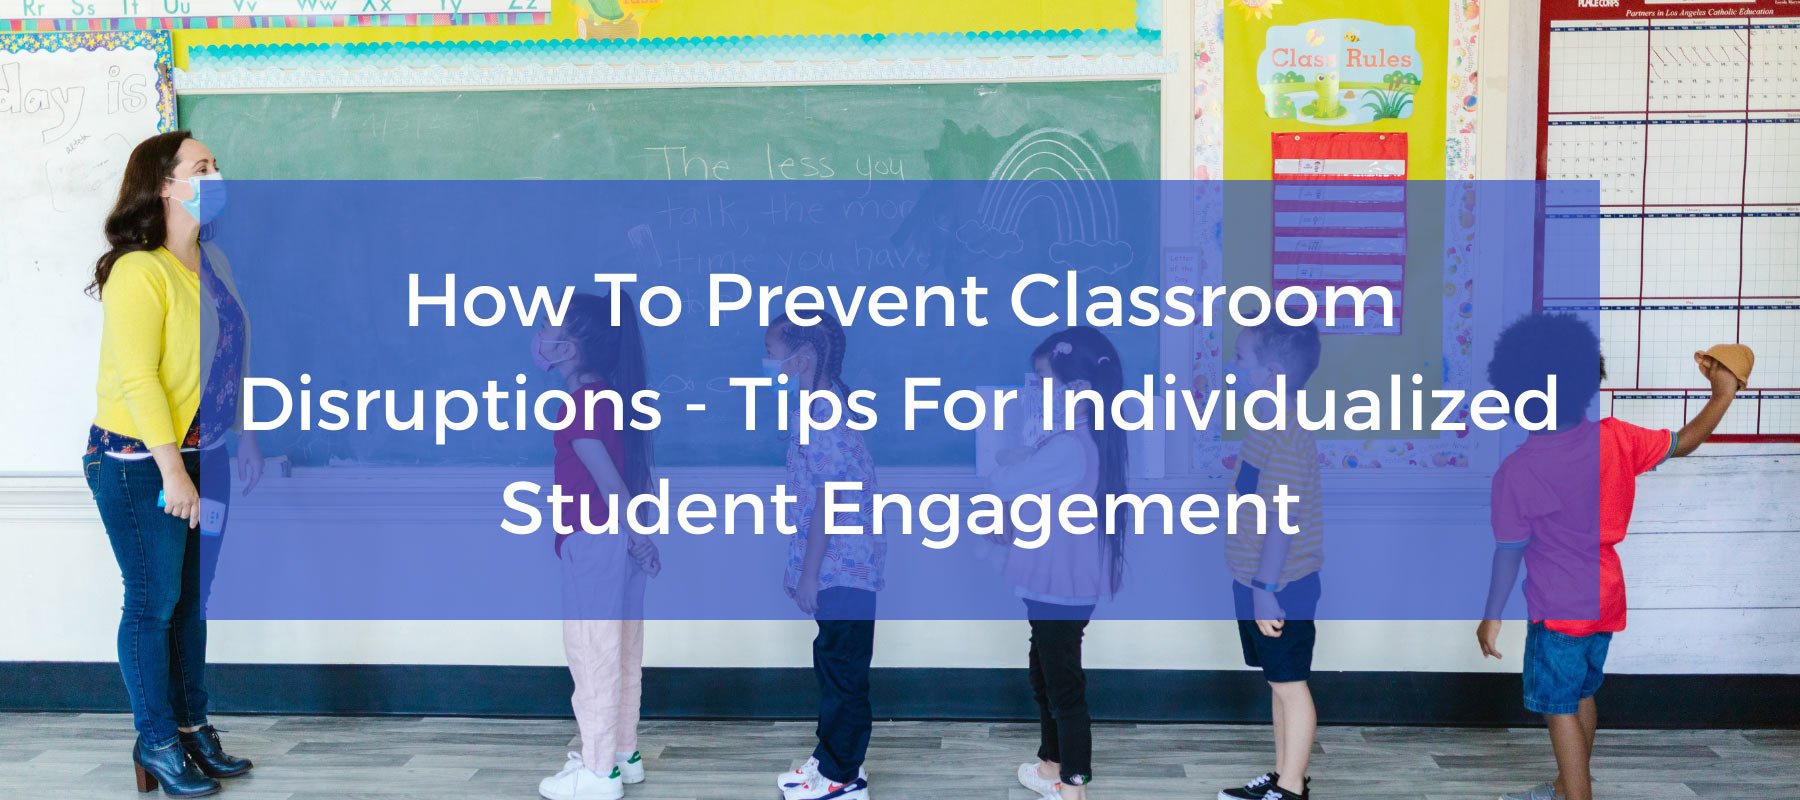 How To Prevent Classroom Disruptions